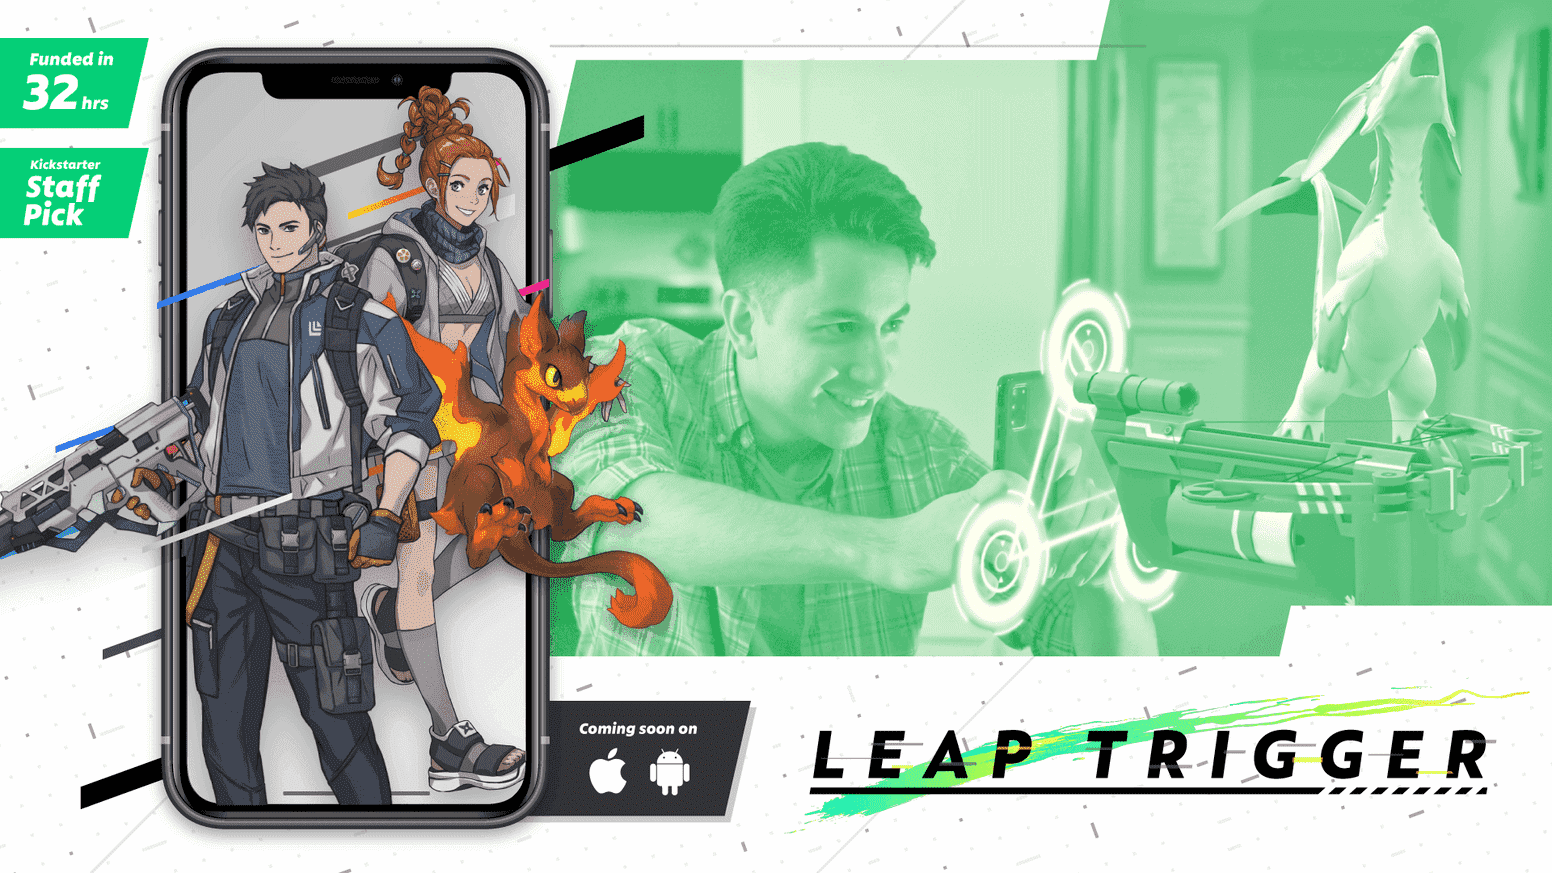 Leap Trigger, a brand new AR Hero shooter, is available for pre-register